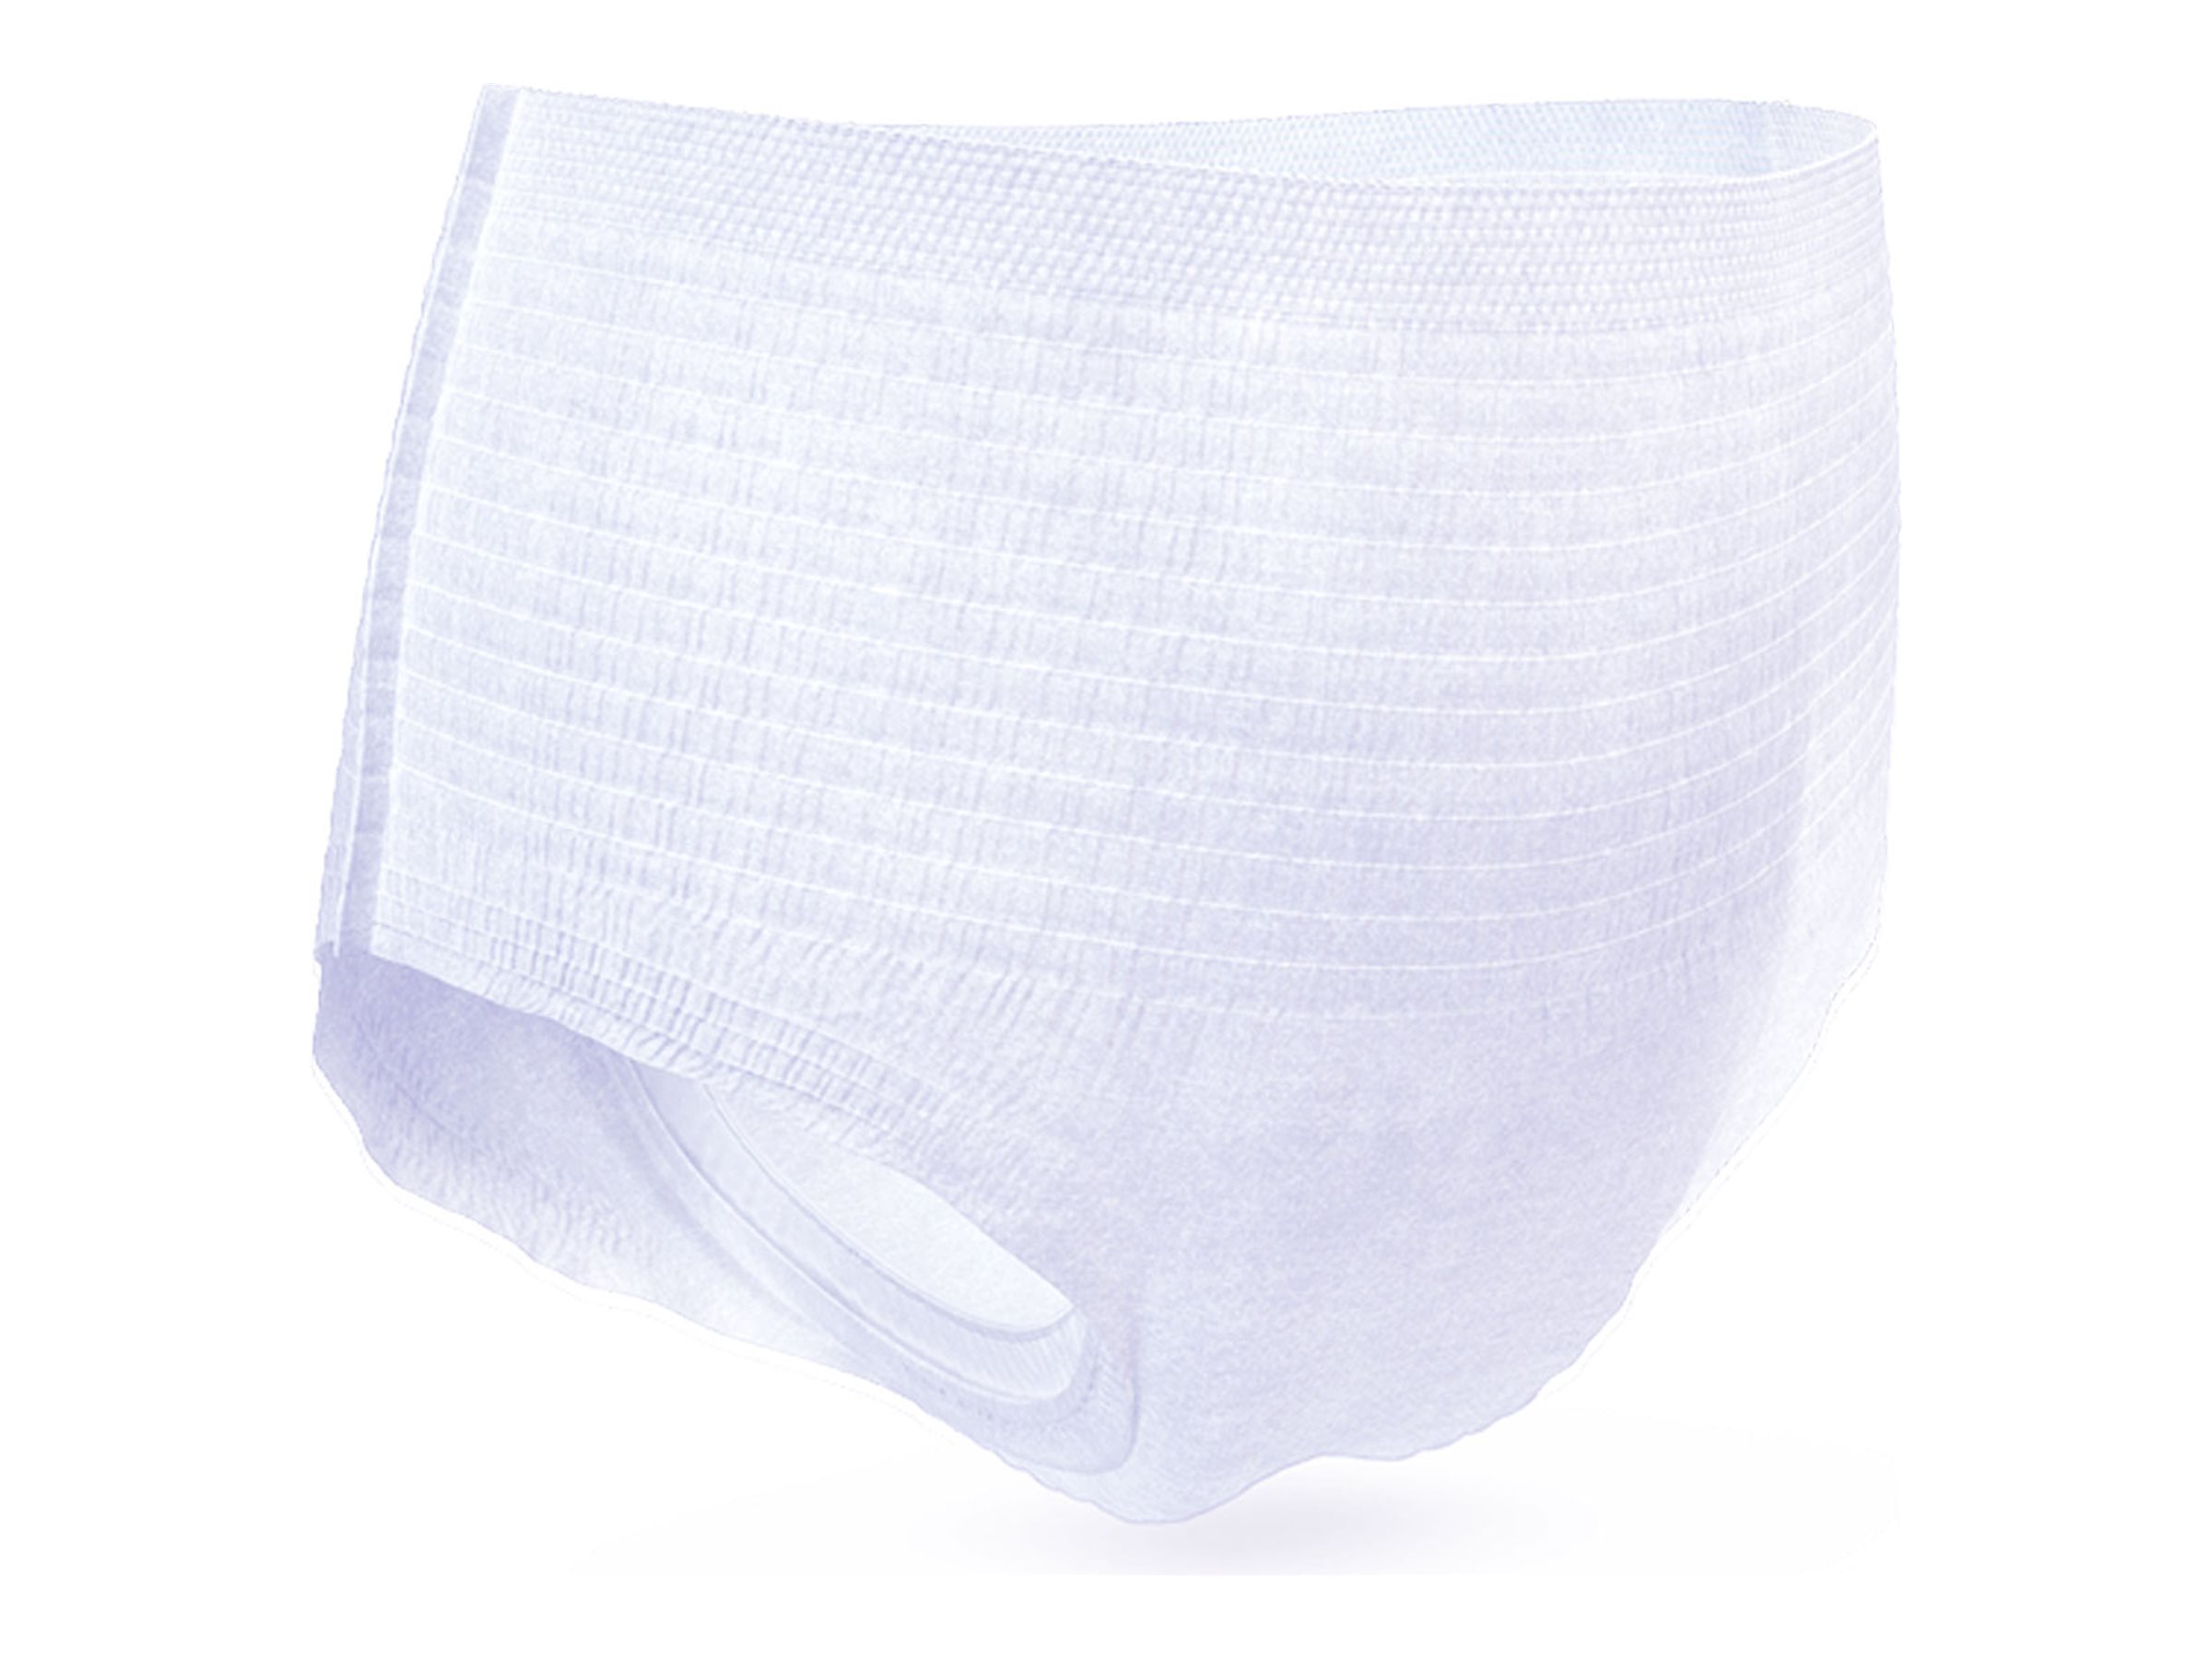 TENA Incontinence Underwear for Women, Overnight Absorbency, Intimates -  Large - 56 Count